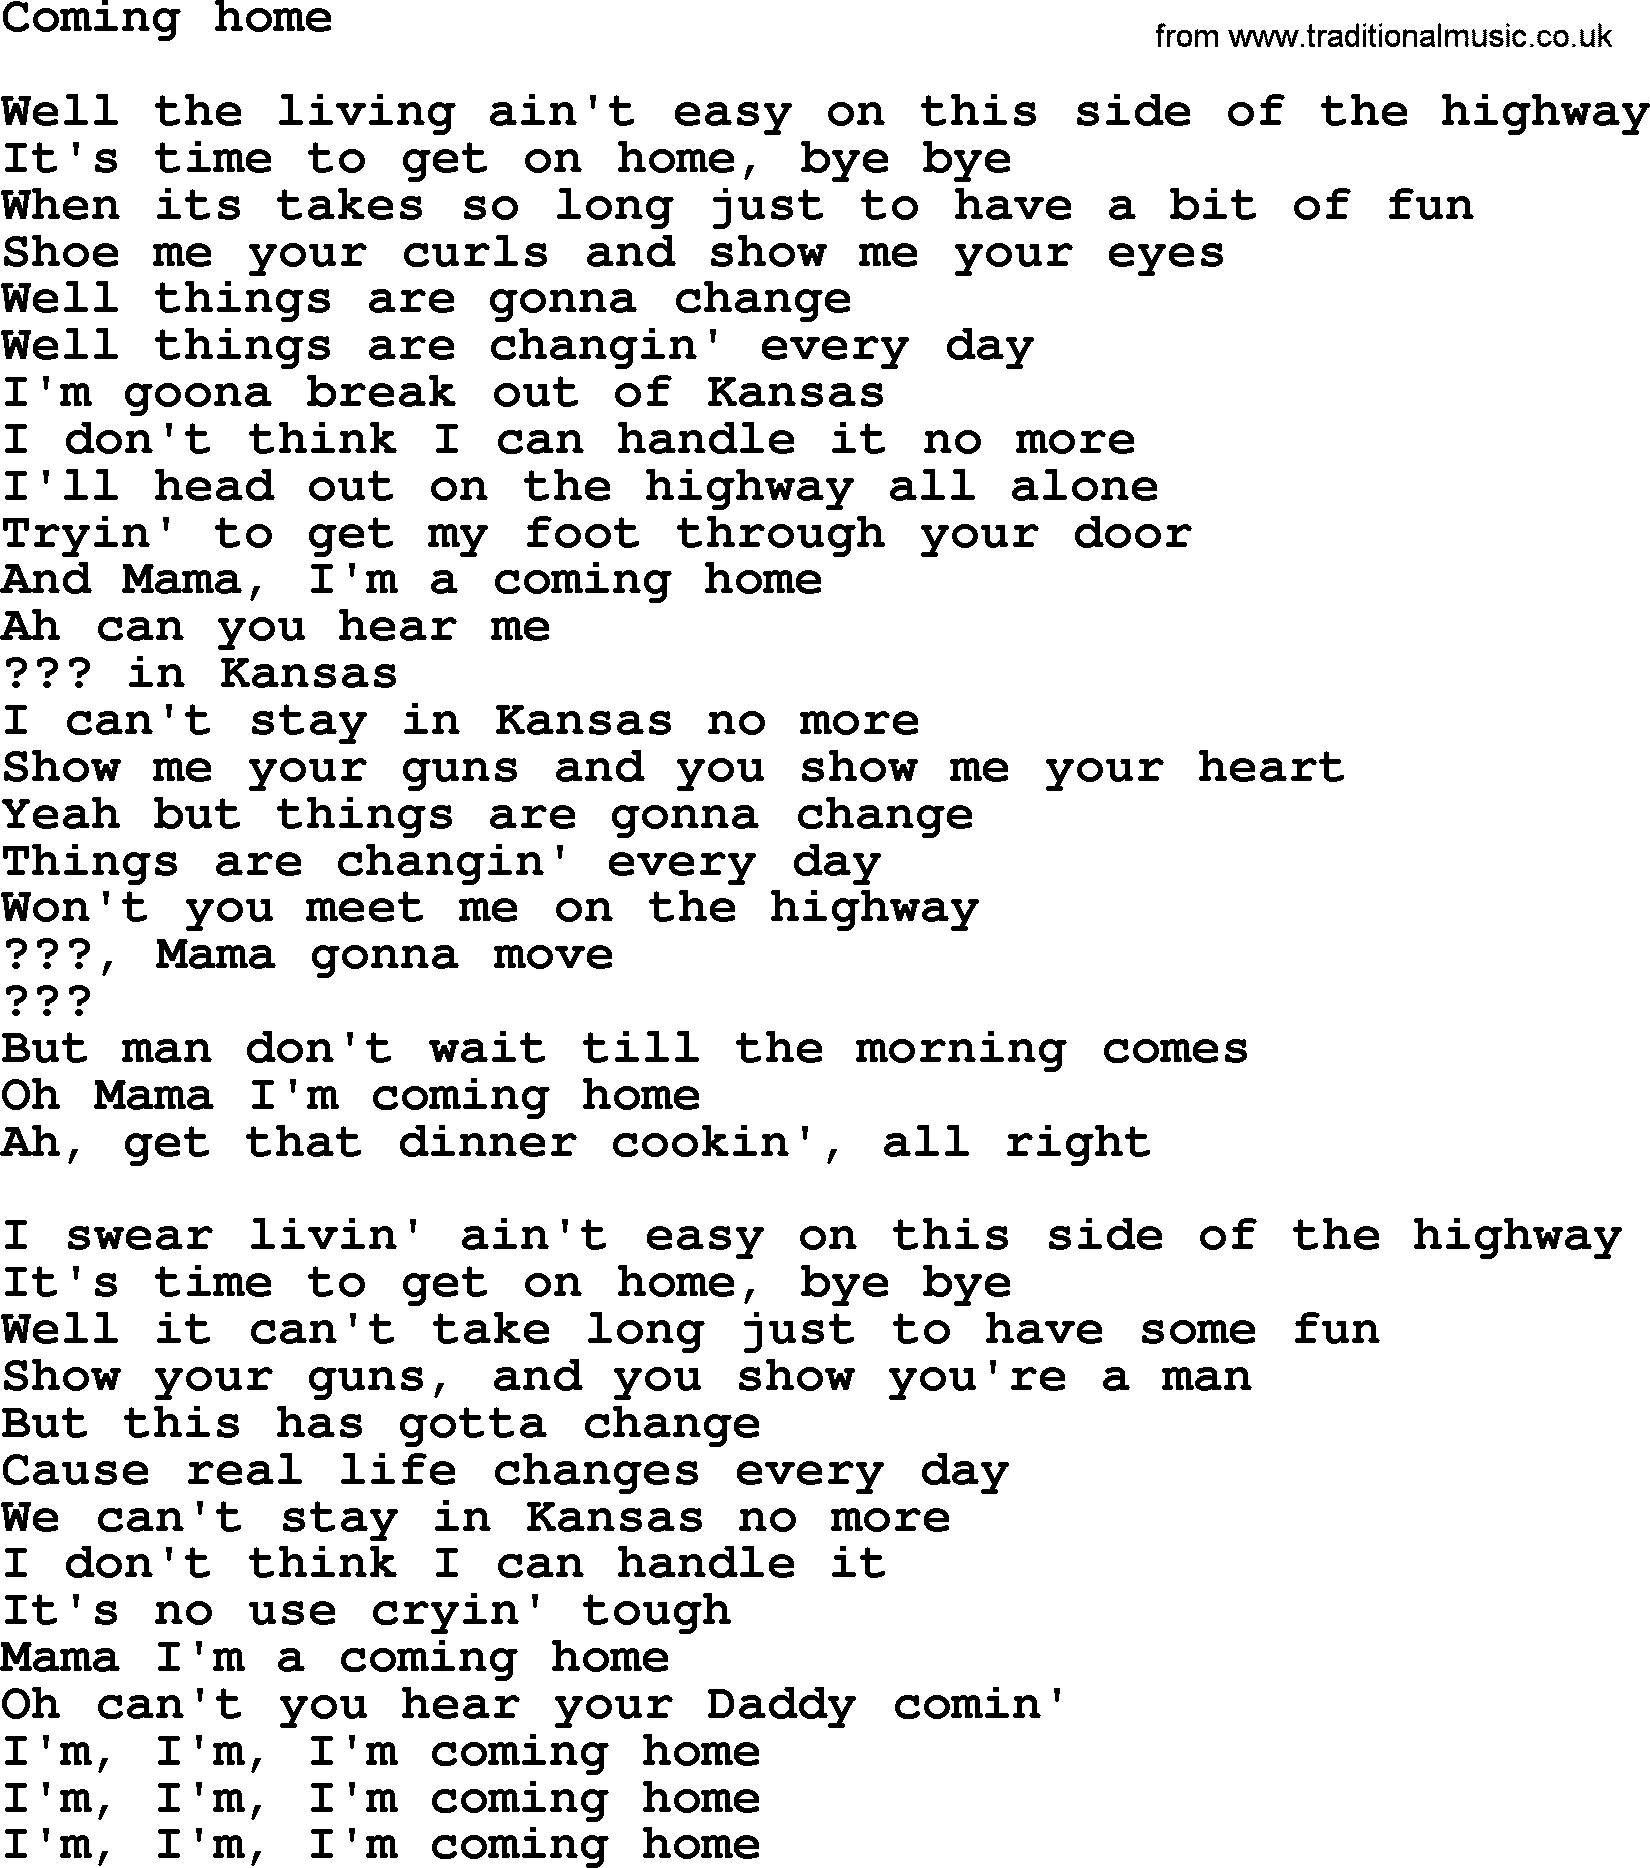 Bruce Springsteen song: Coming Home lyrics